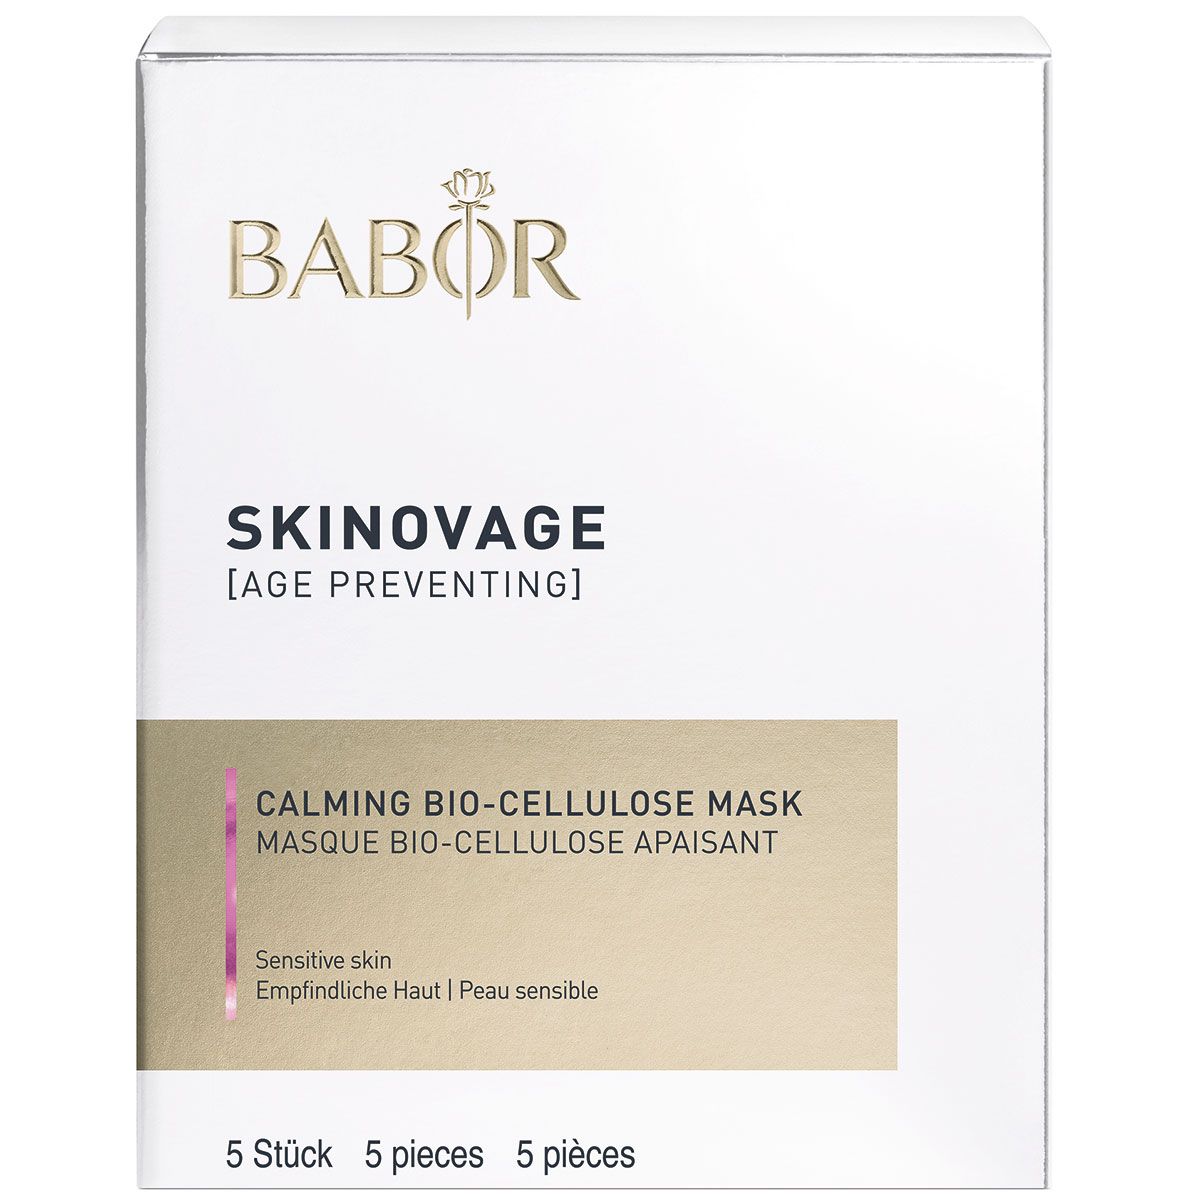 BABOR Skinovage Calming Cellulose Mask